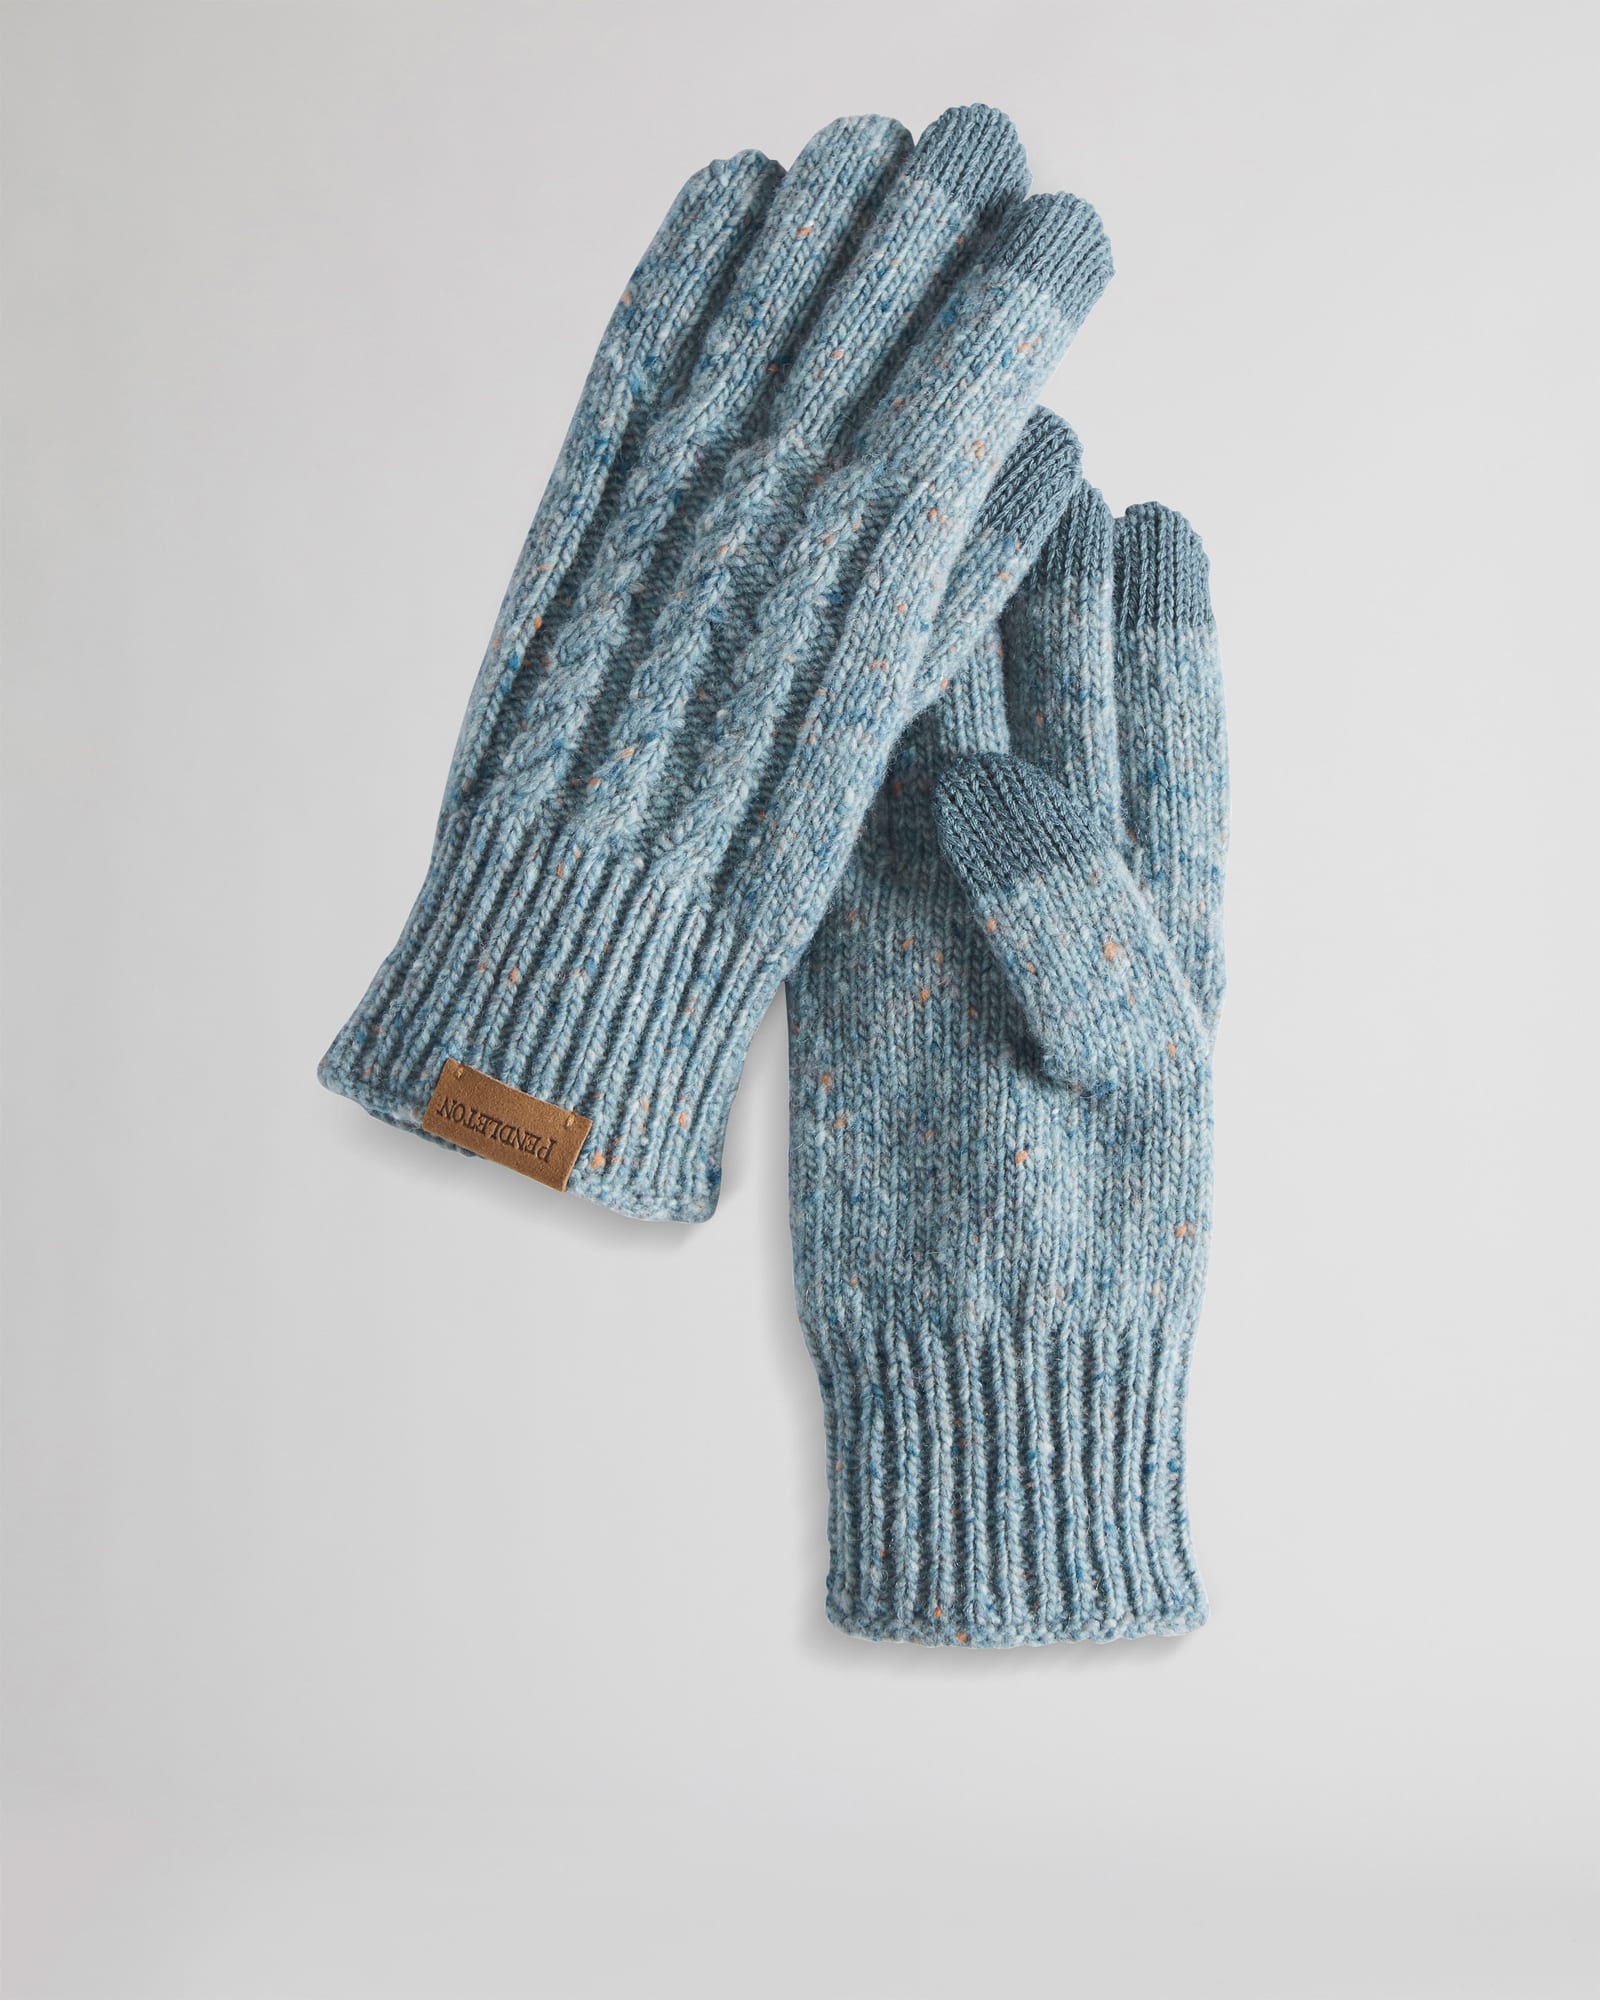 CABLE KNIT TEXTING GLOVE